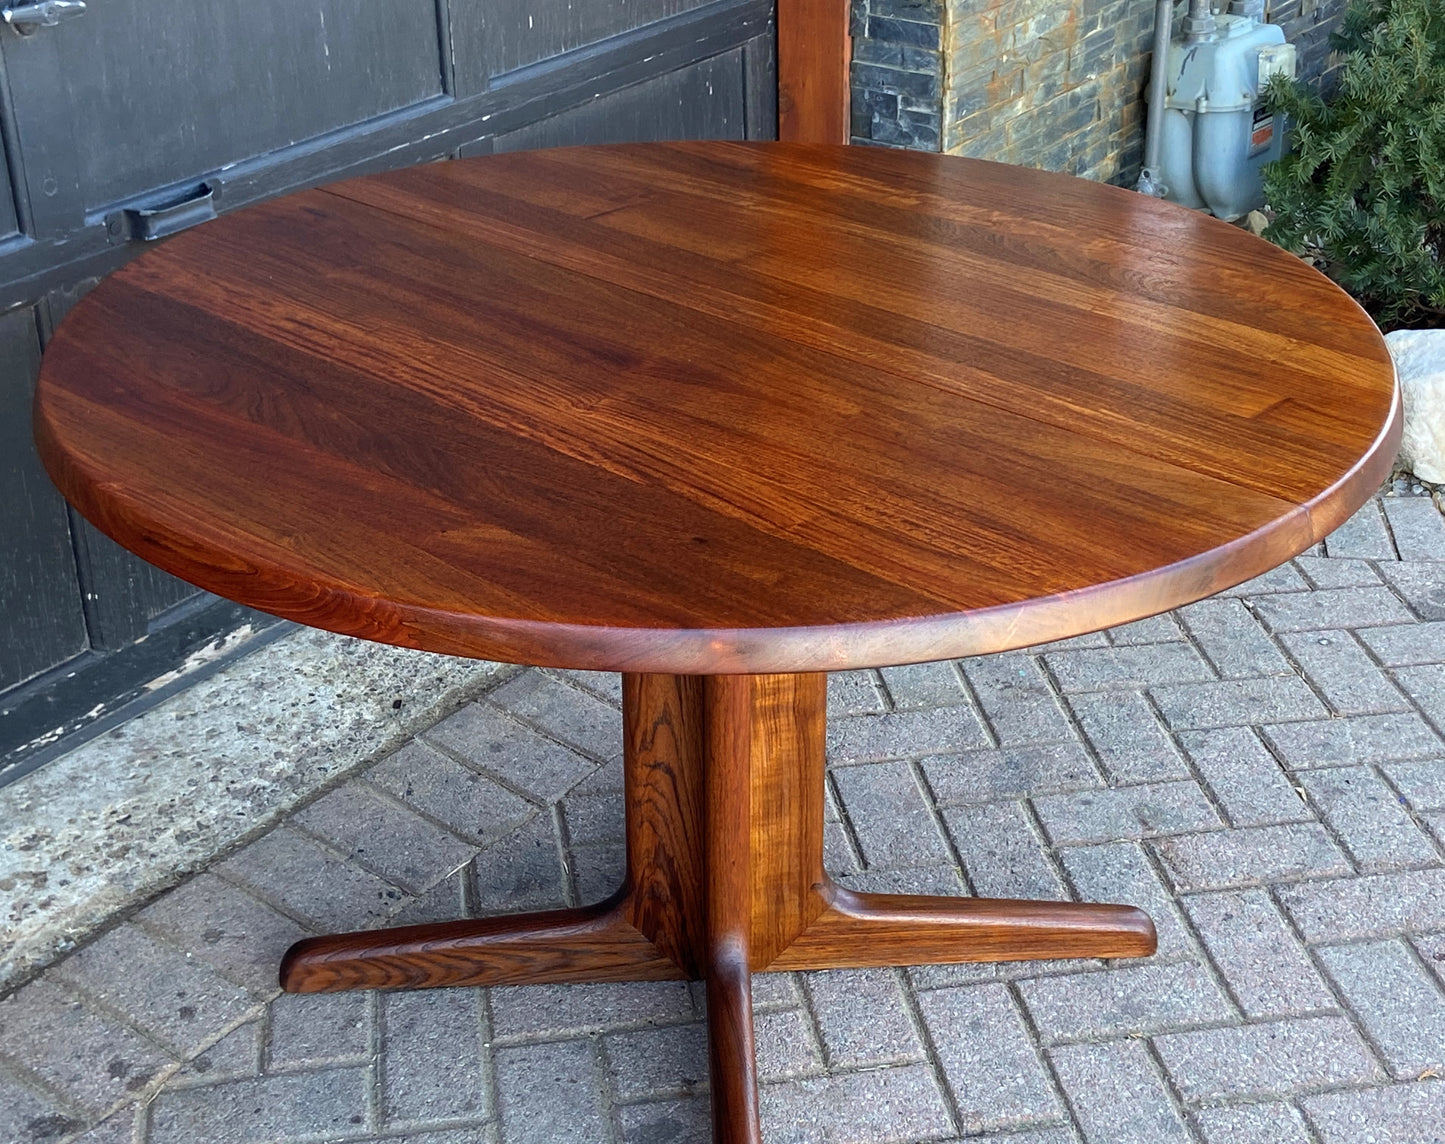 REFINISHED Rare MCM SOLID Rosewood Table Round w 1 Leaf 47" - 72" PERFECT